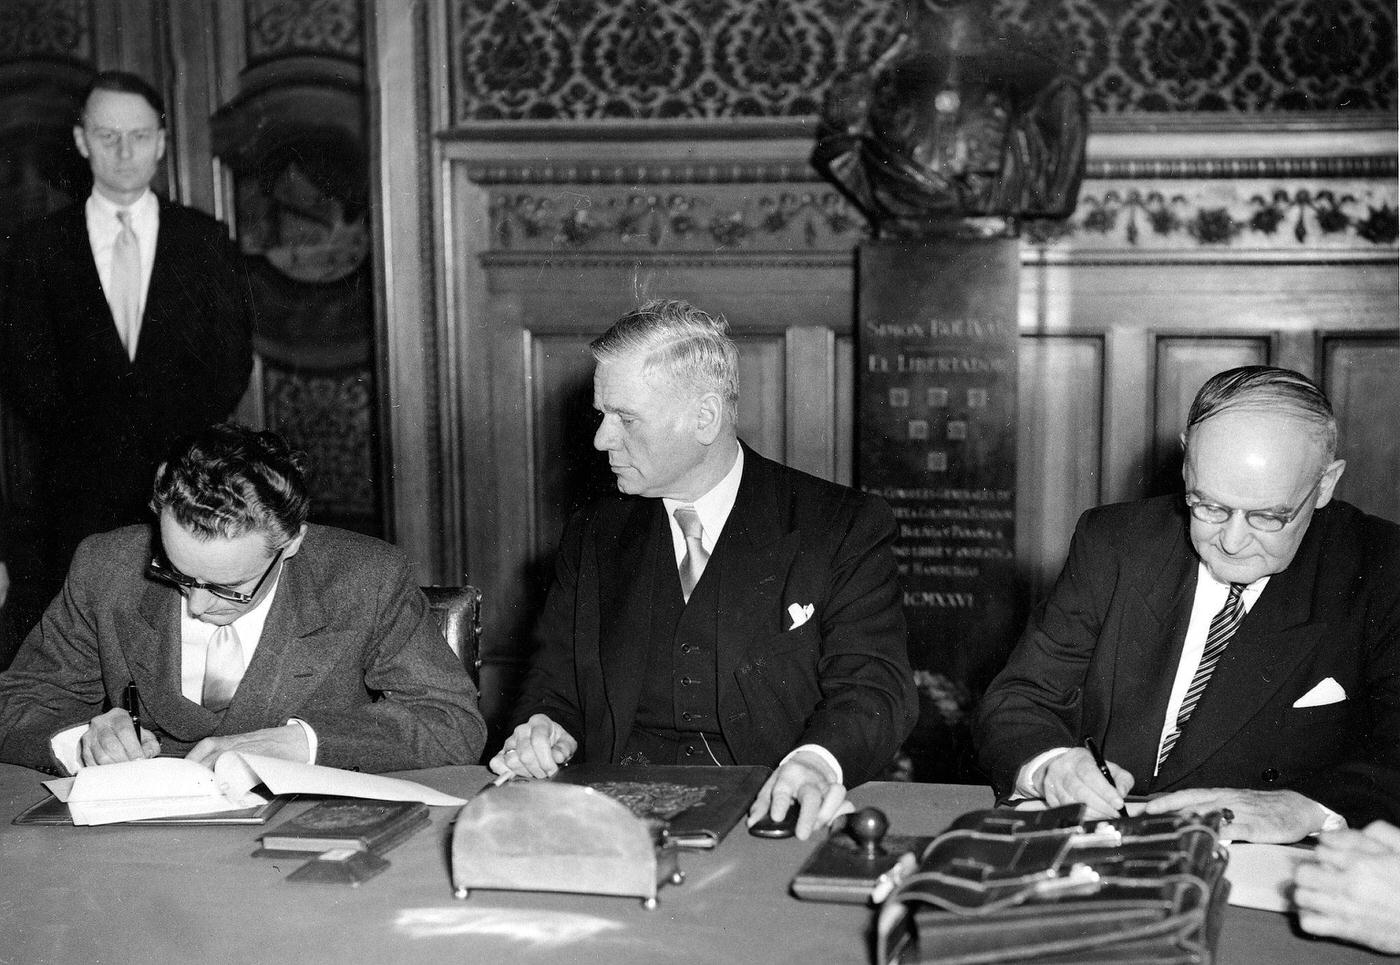 Max Brauer, politician and First Mayor of Hamburg, at the signing of the German-Chilean trade agreement in the Hamburg Rathaus, 1951